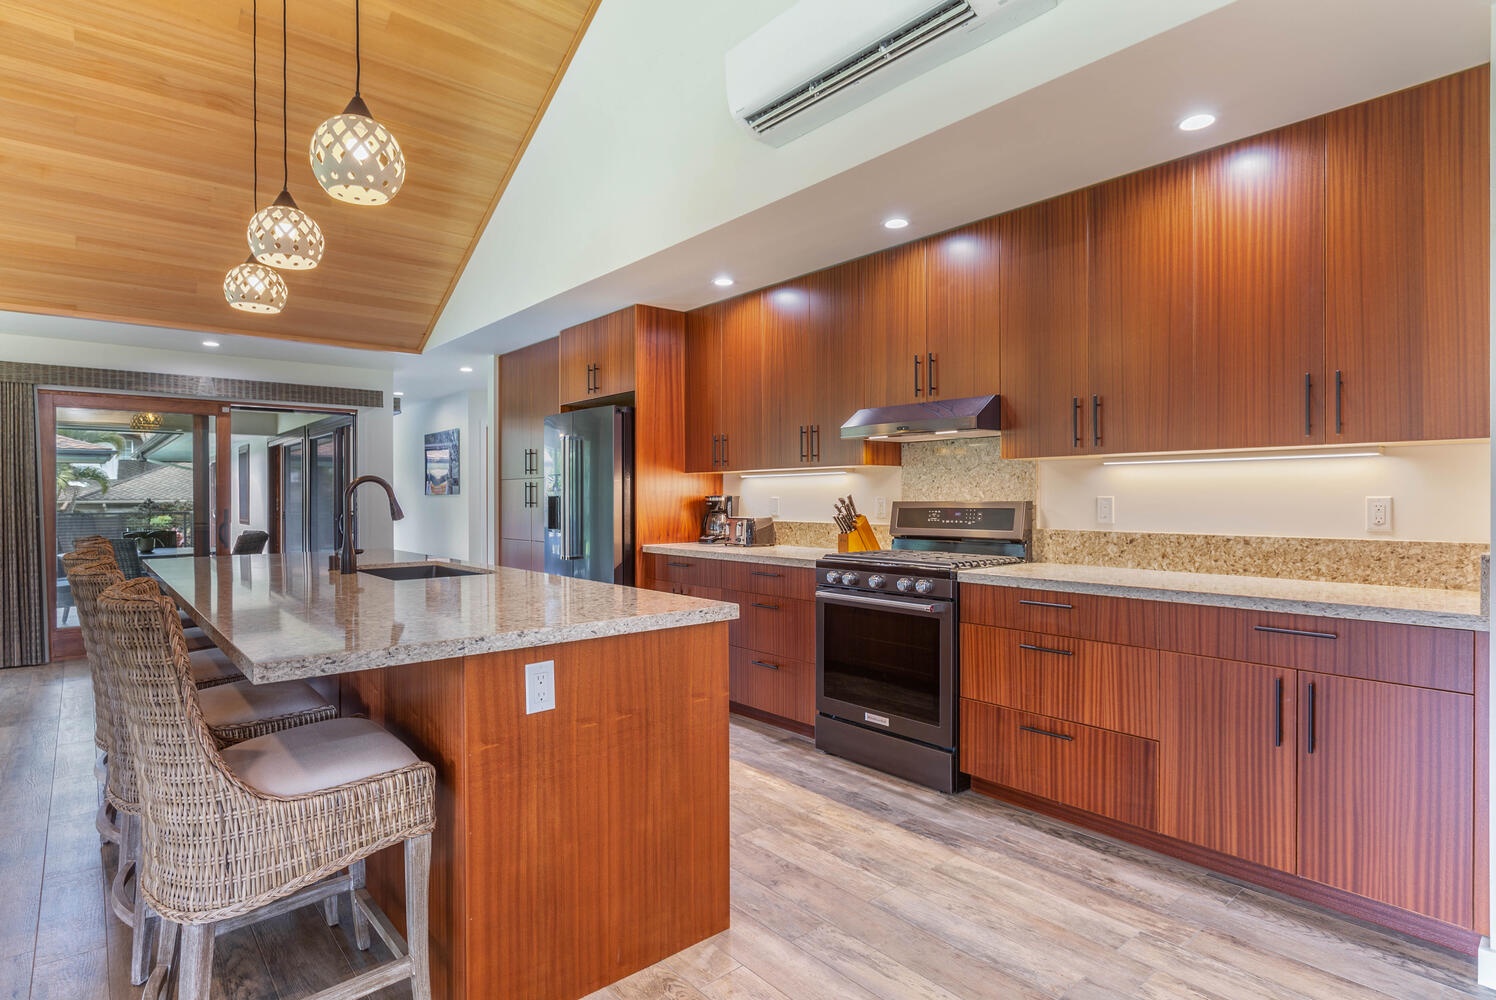 Princeville Vacation Rentals, Aloha Villa - Cook your favorite meals in this stunning kitchen